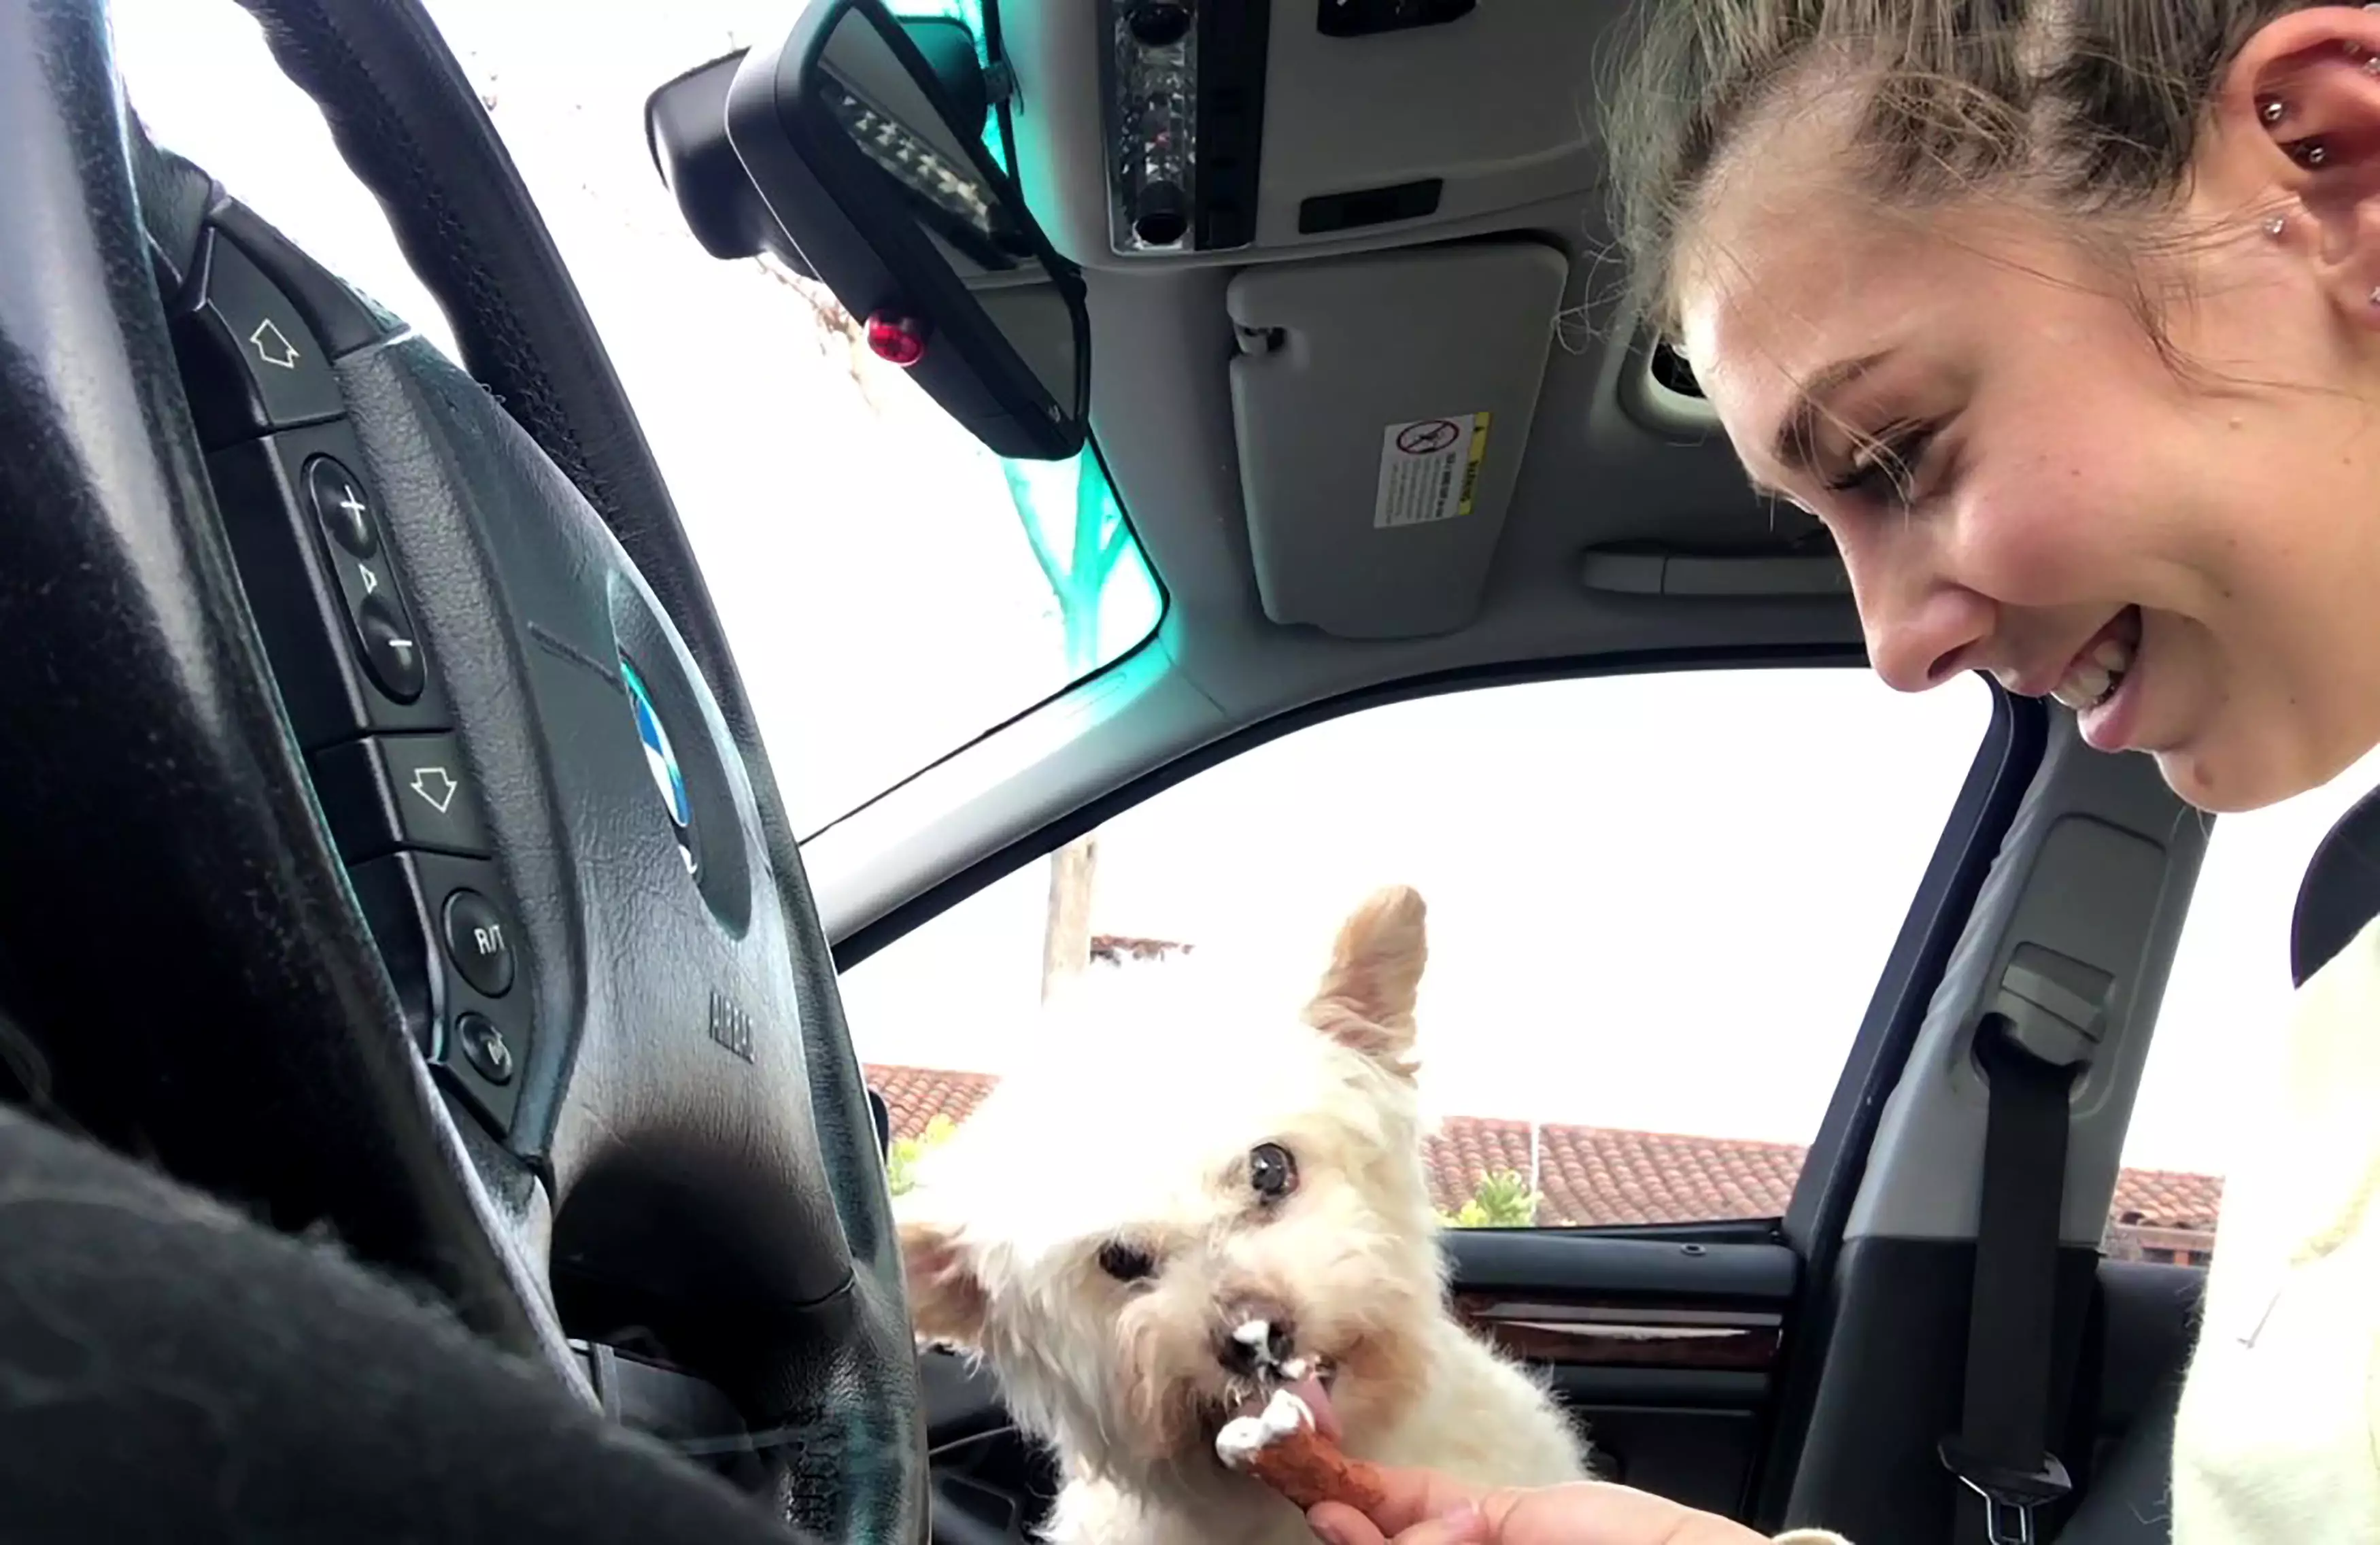 Gizmo with Kira in the car enjoying his last treats.